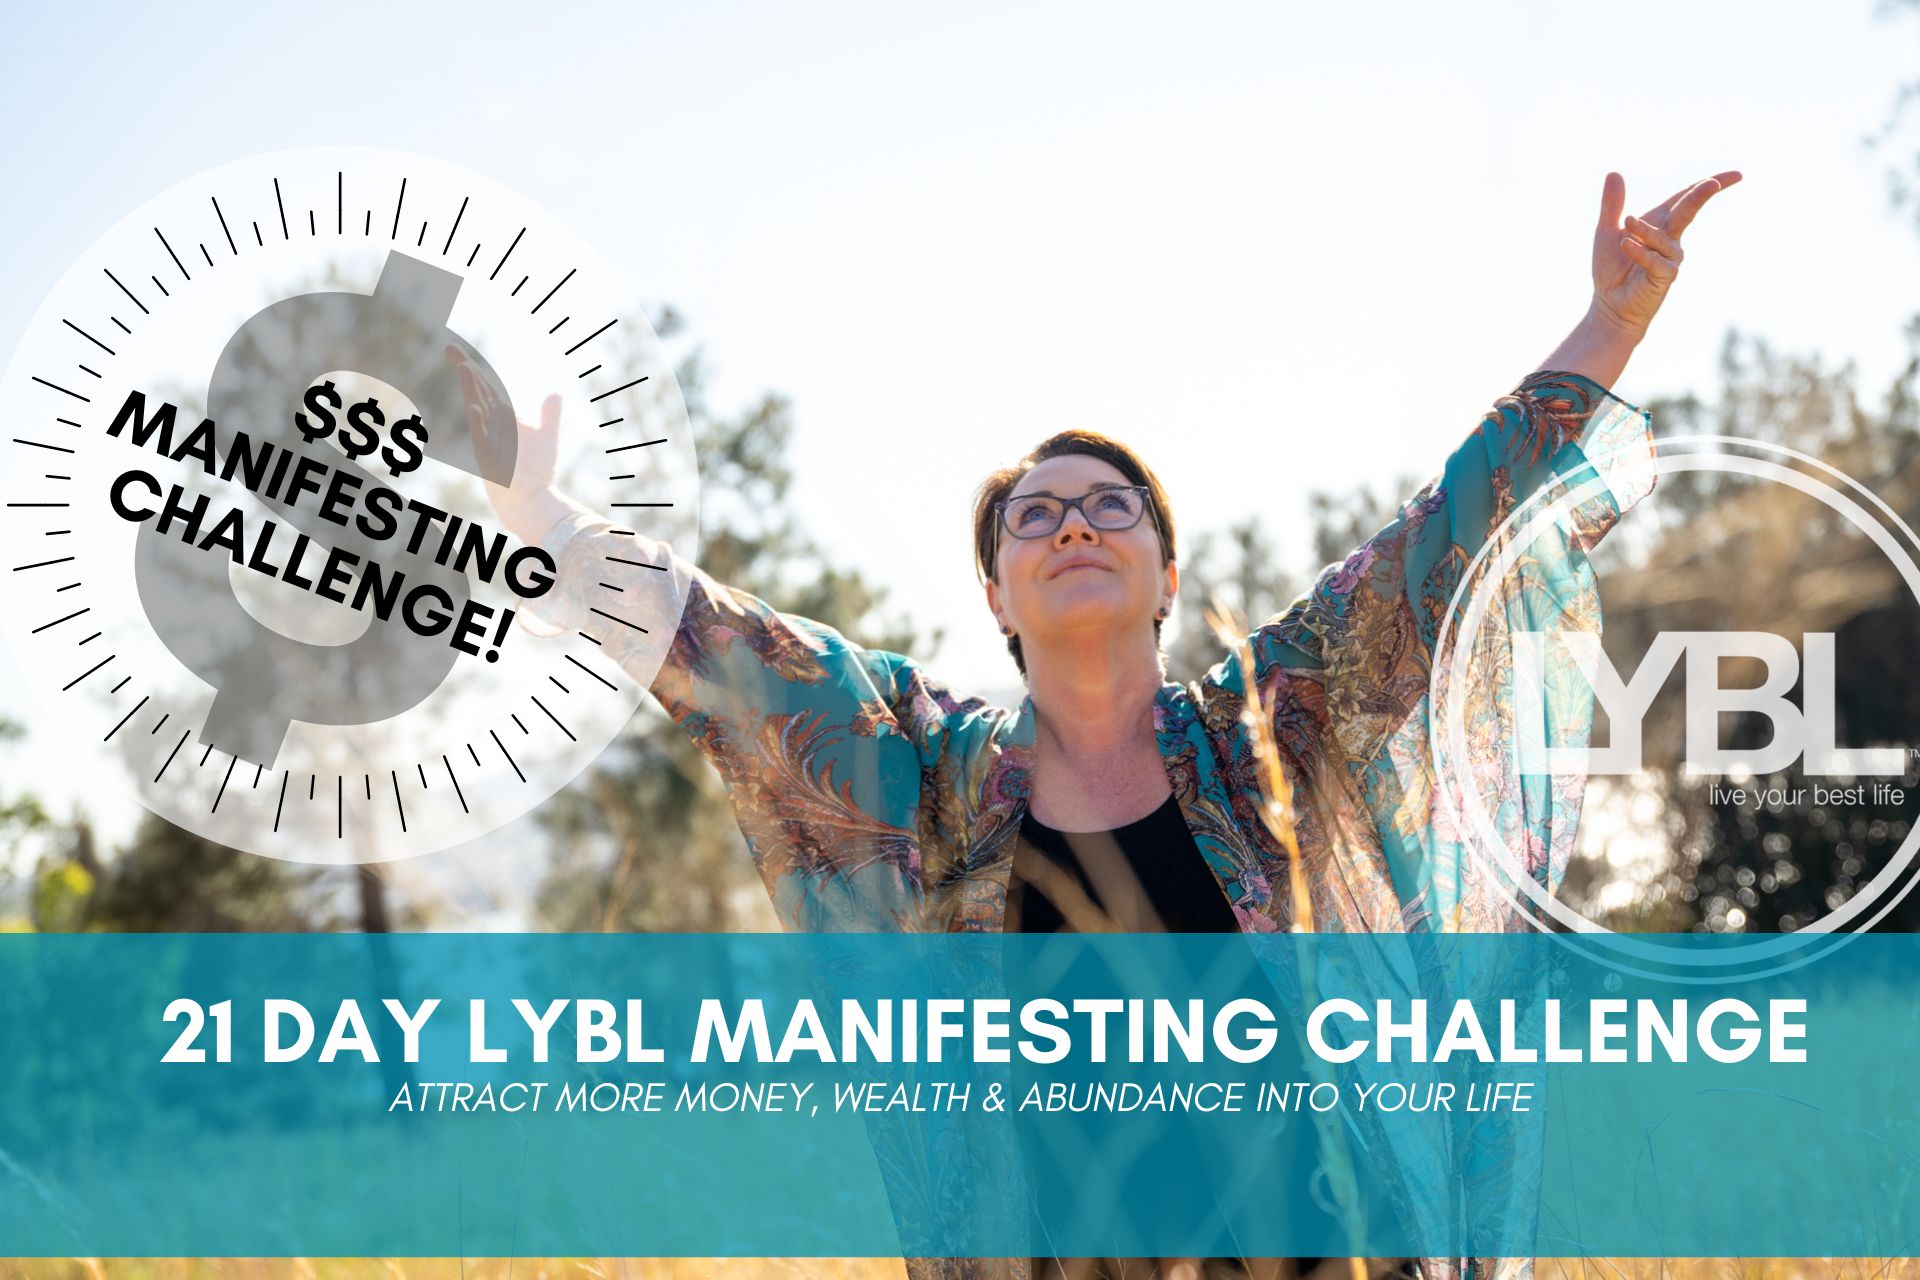 21 Day LYBL Manifesting Challenge : Live Your Best Life